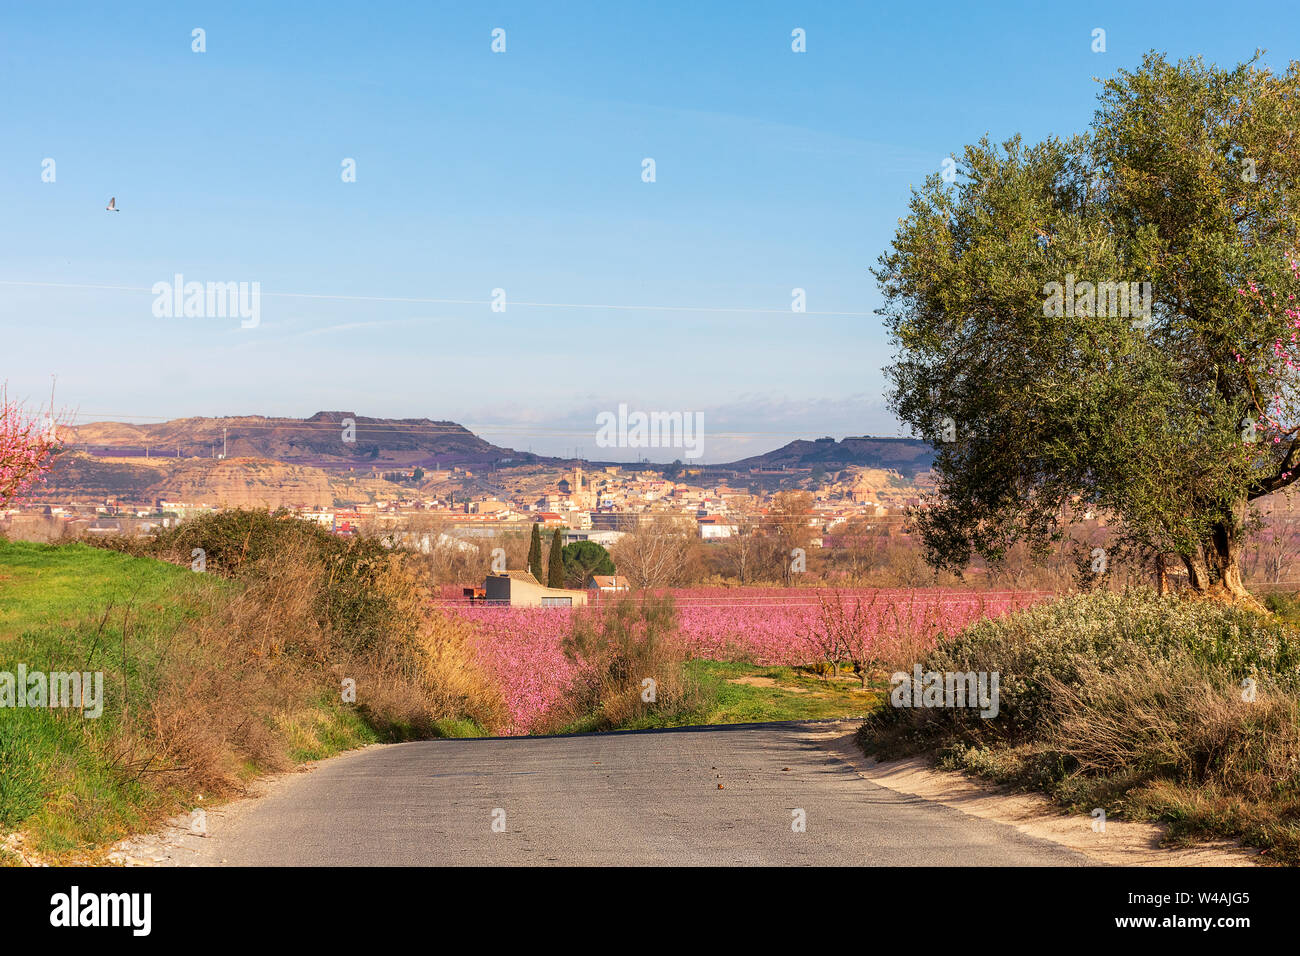 Rural road between peach tree field in bloom. Olive tree at foreground. Pink flowers peach tree at sunrise. Aitona, Alpicat. Stock Photo